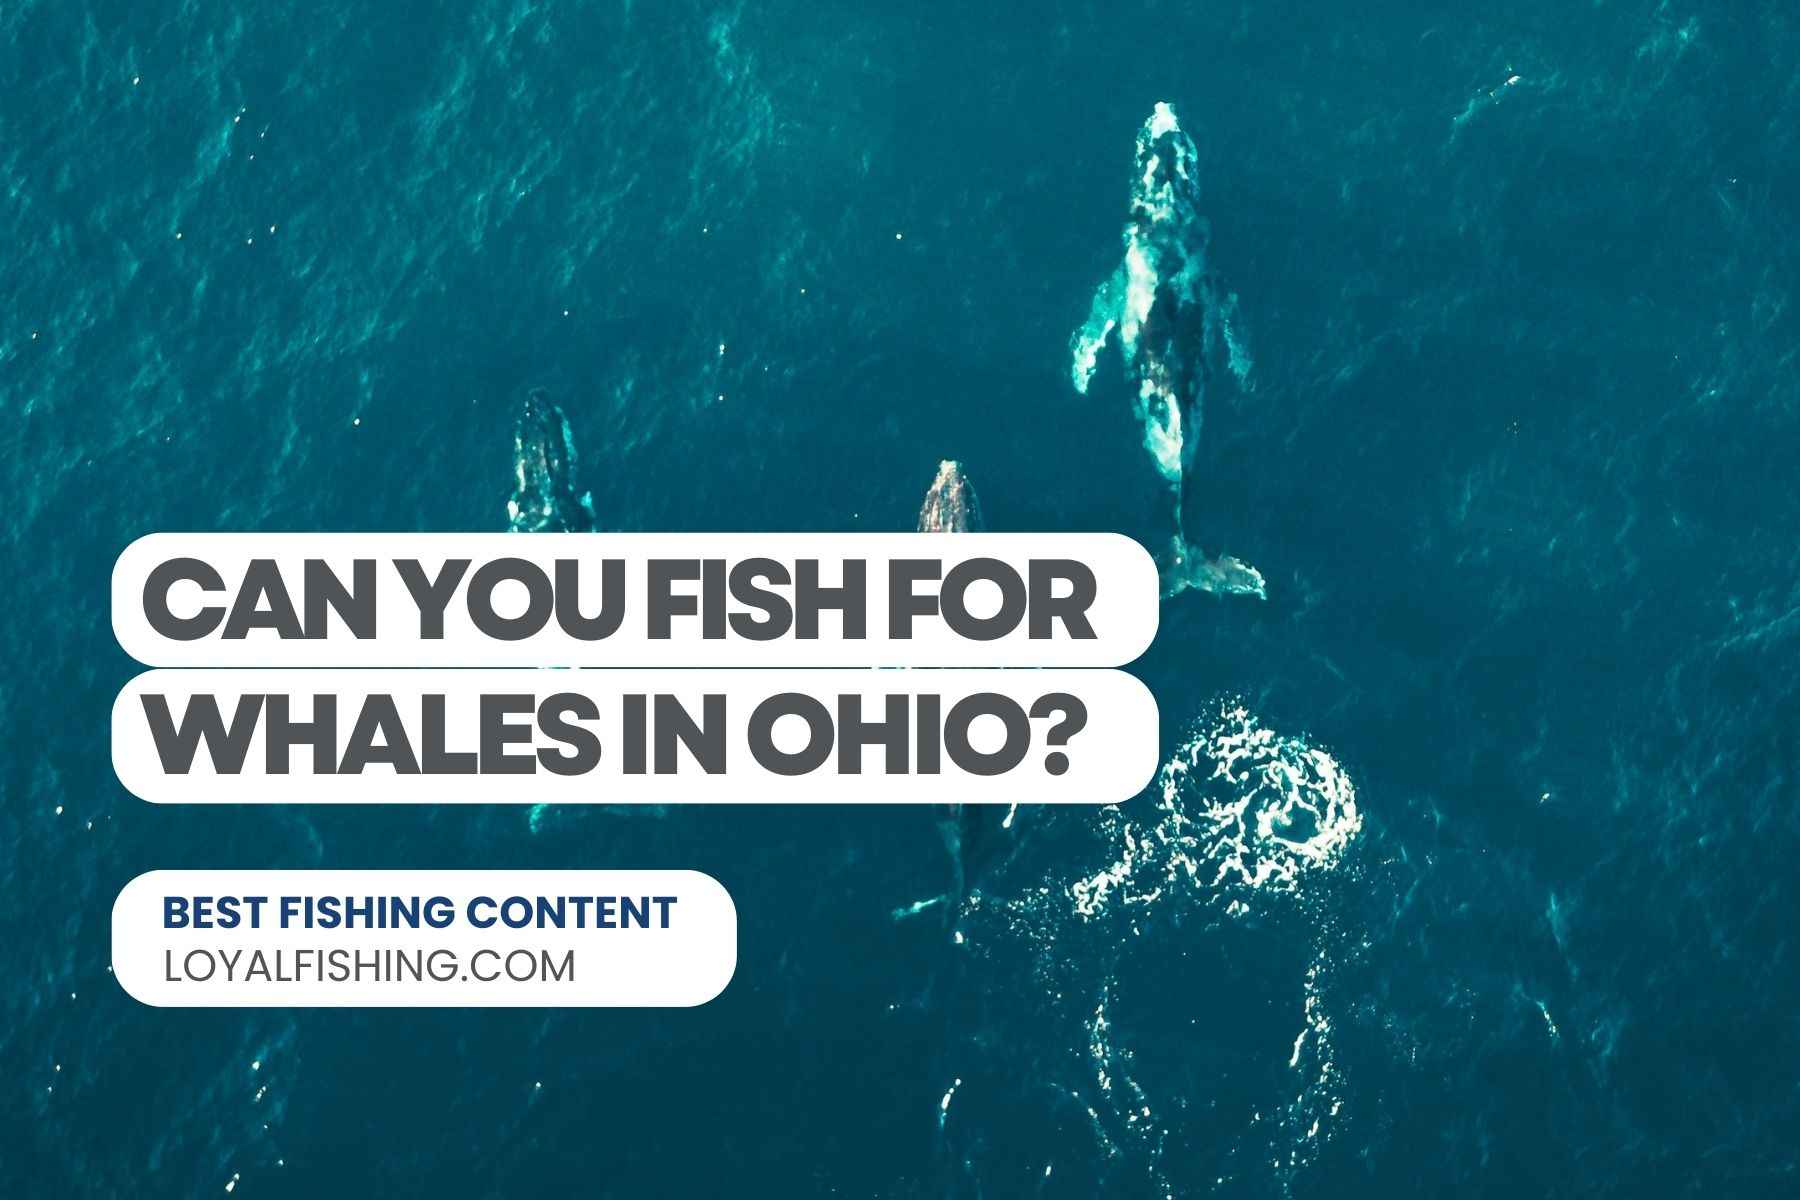 Can You Fish for Whales in Ohio?